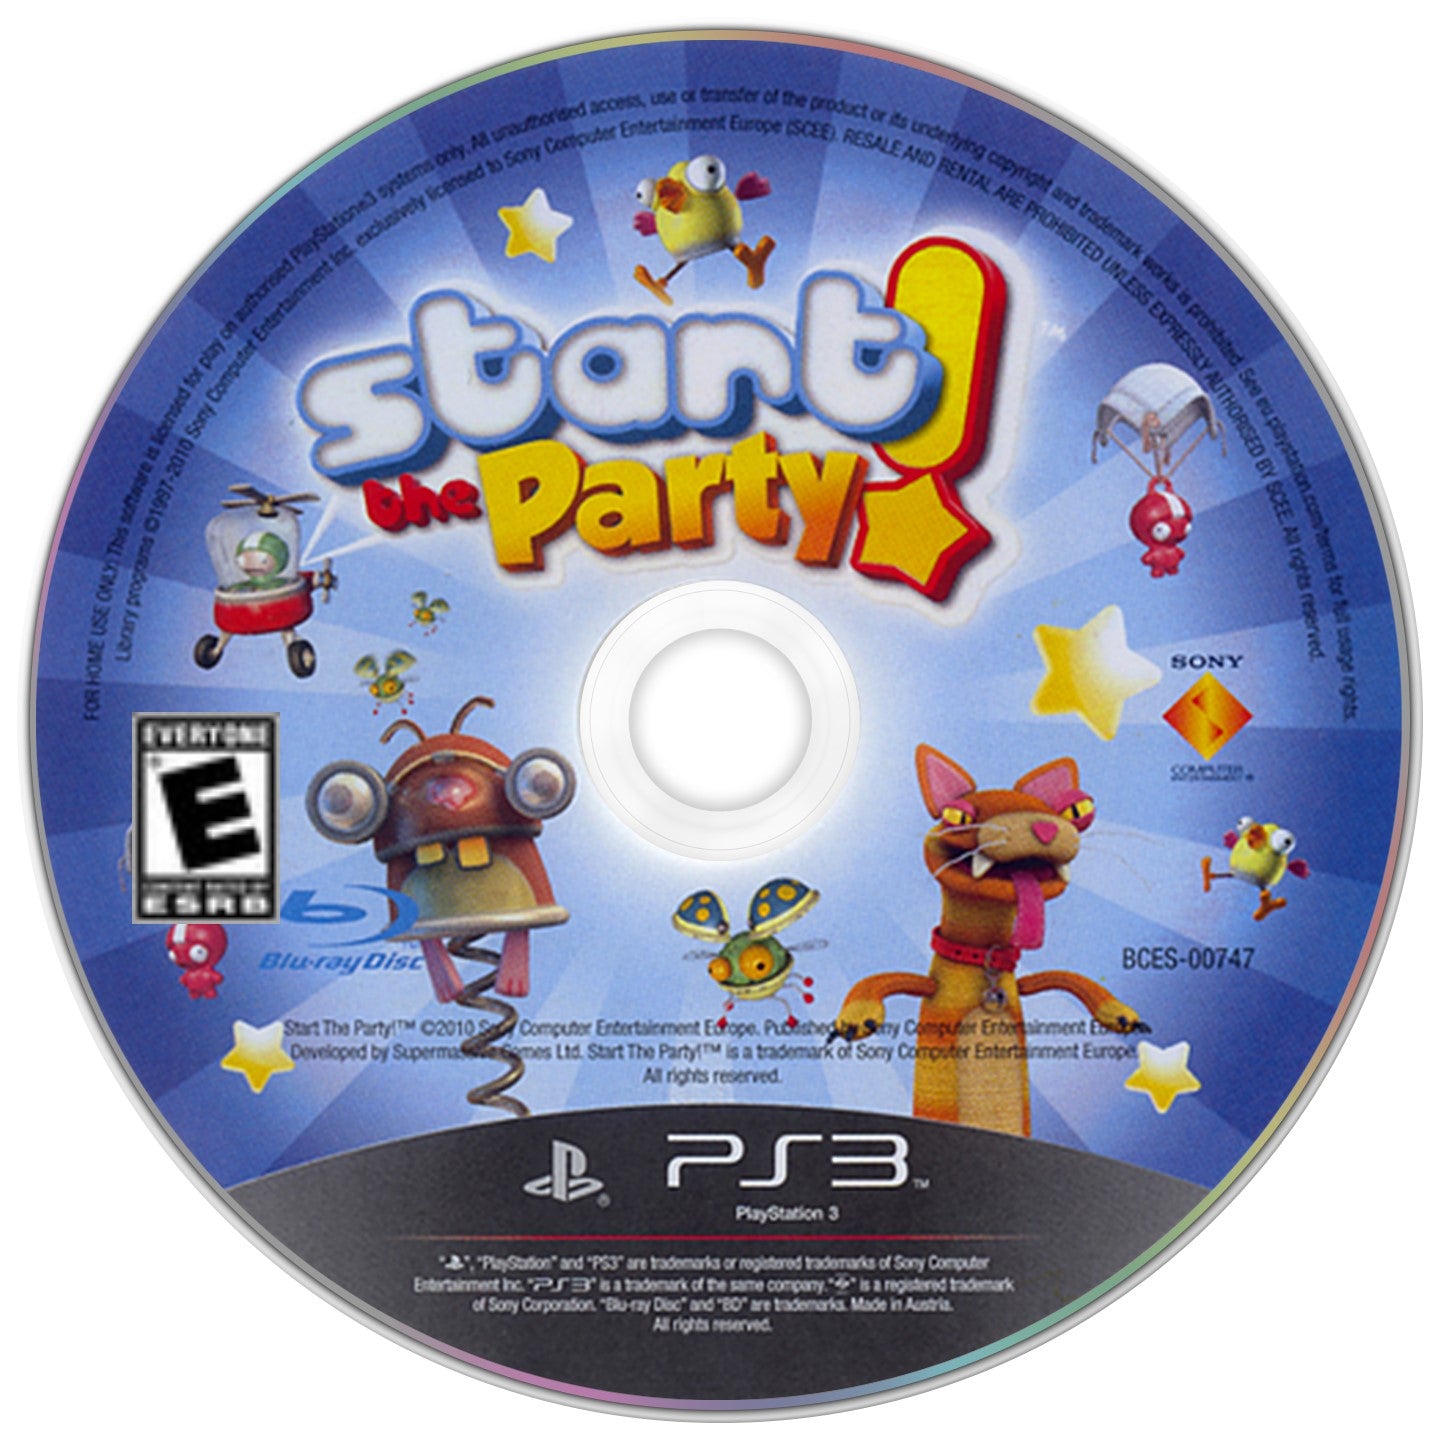 Start the Party! - PlayStation 3 (PS3) Game